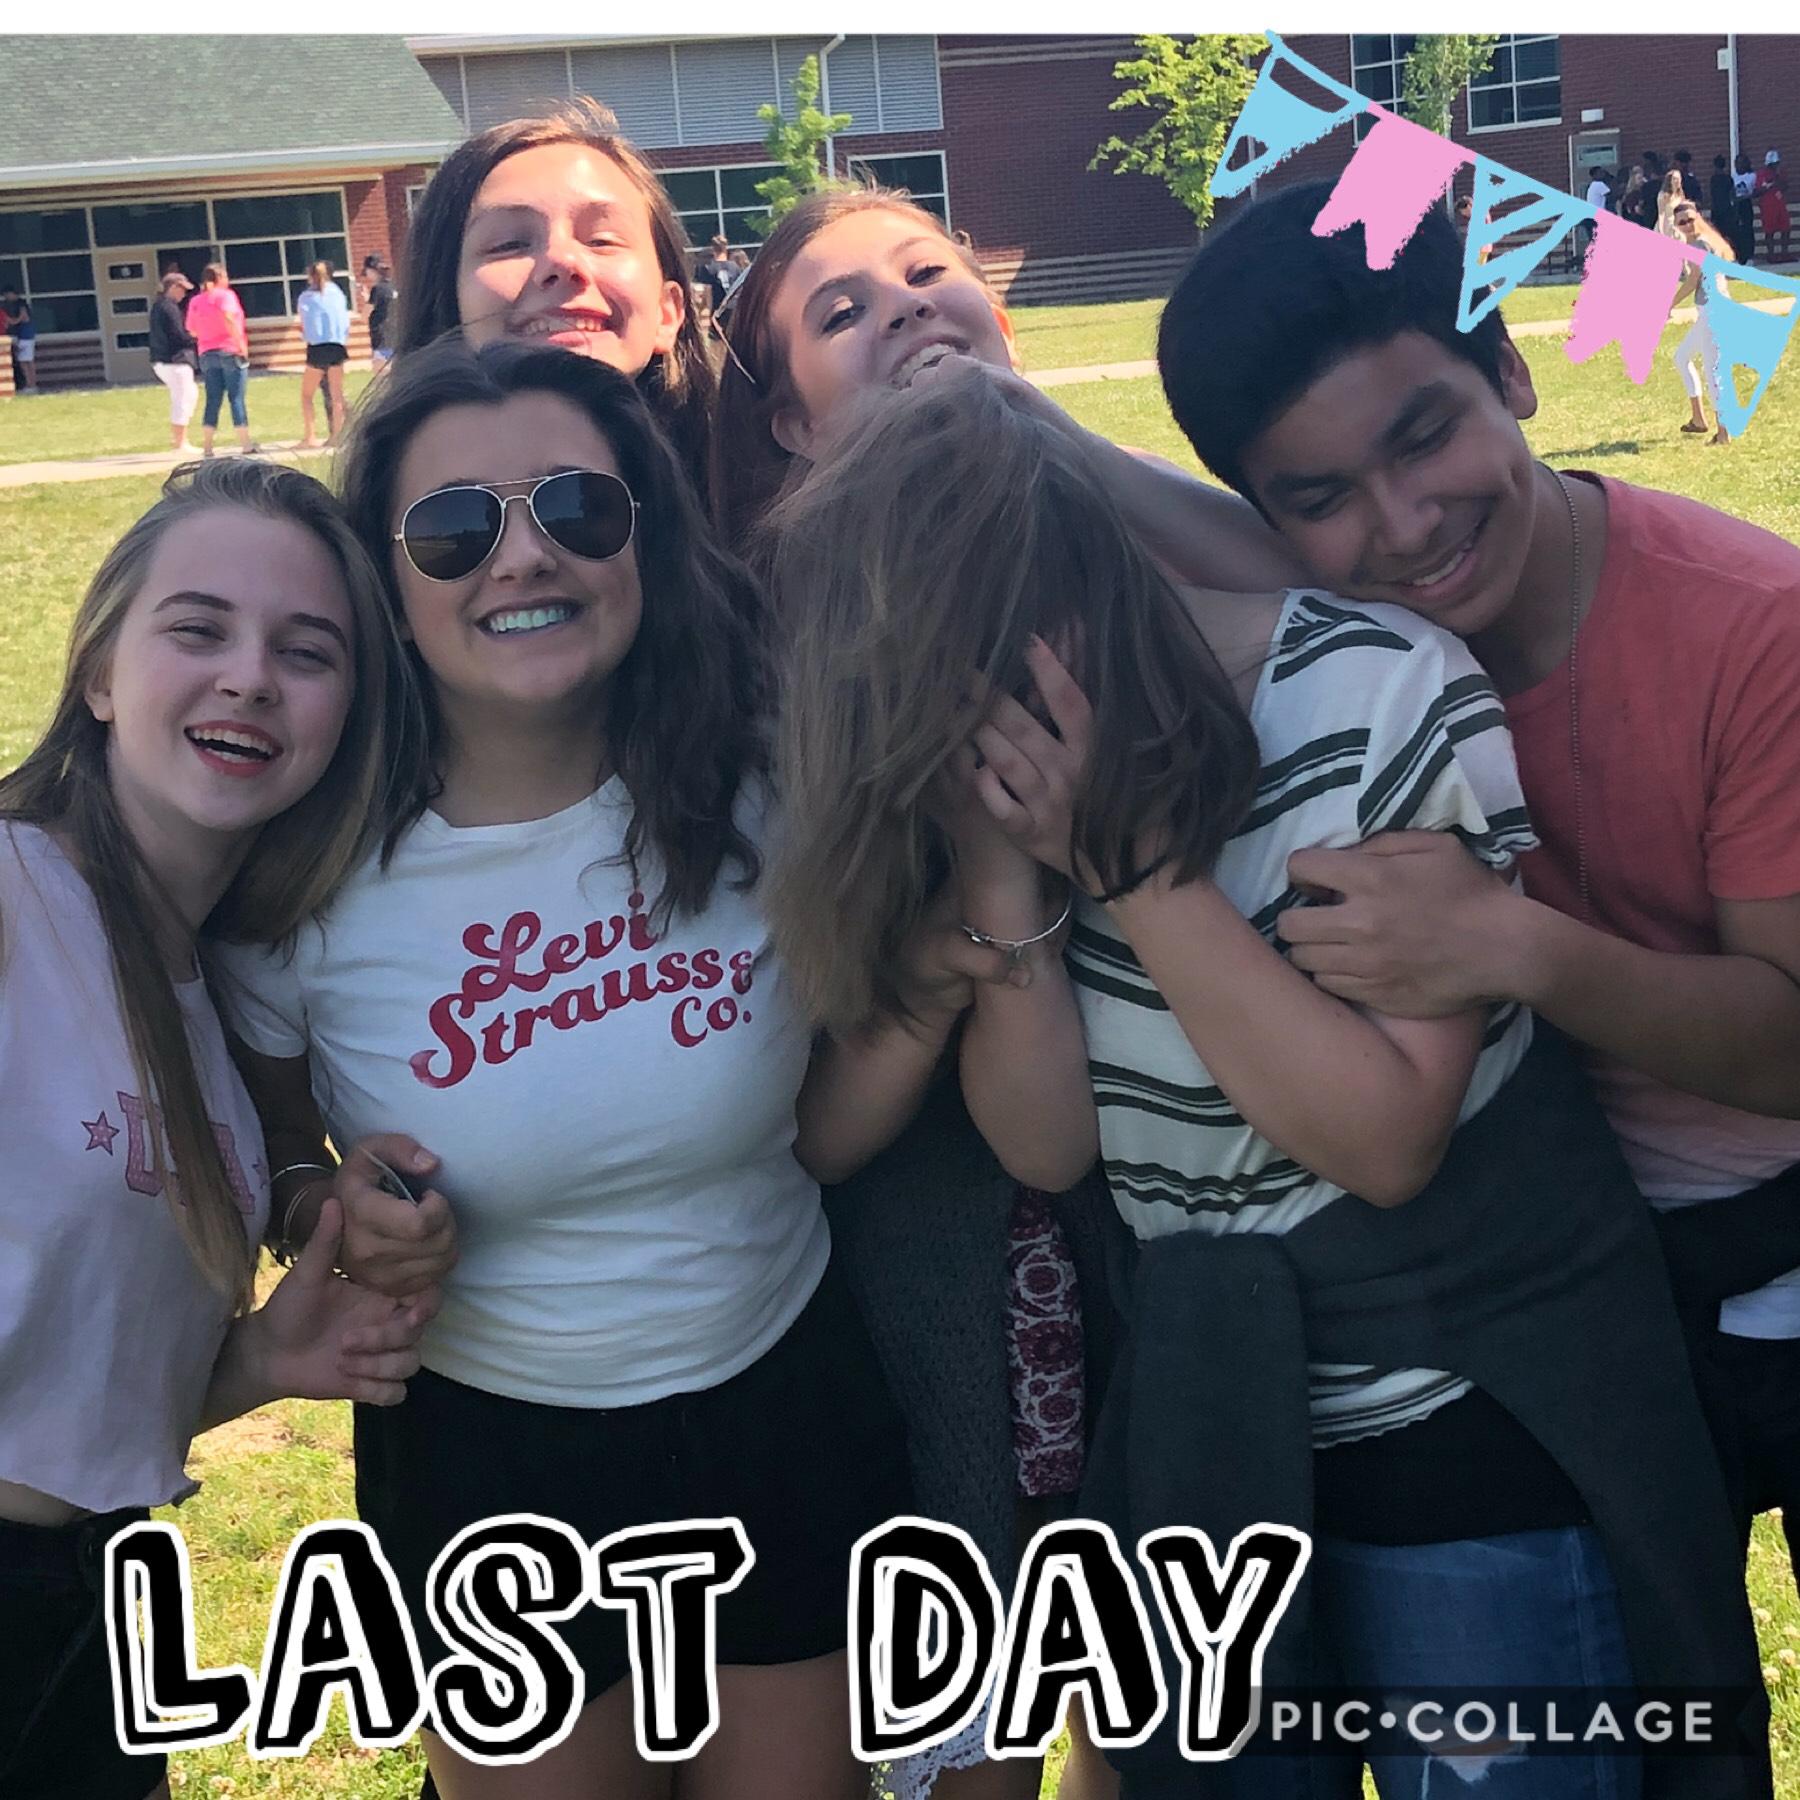 LAST DAY OF SCHOOL!! Spending the year with all my amazing best friends has been a privilege! I’ll miss you all! @kendall @owen @lydia @judy @ava
Hope we stay a powerful team through high school